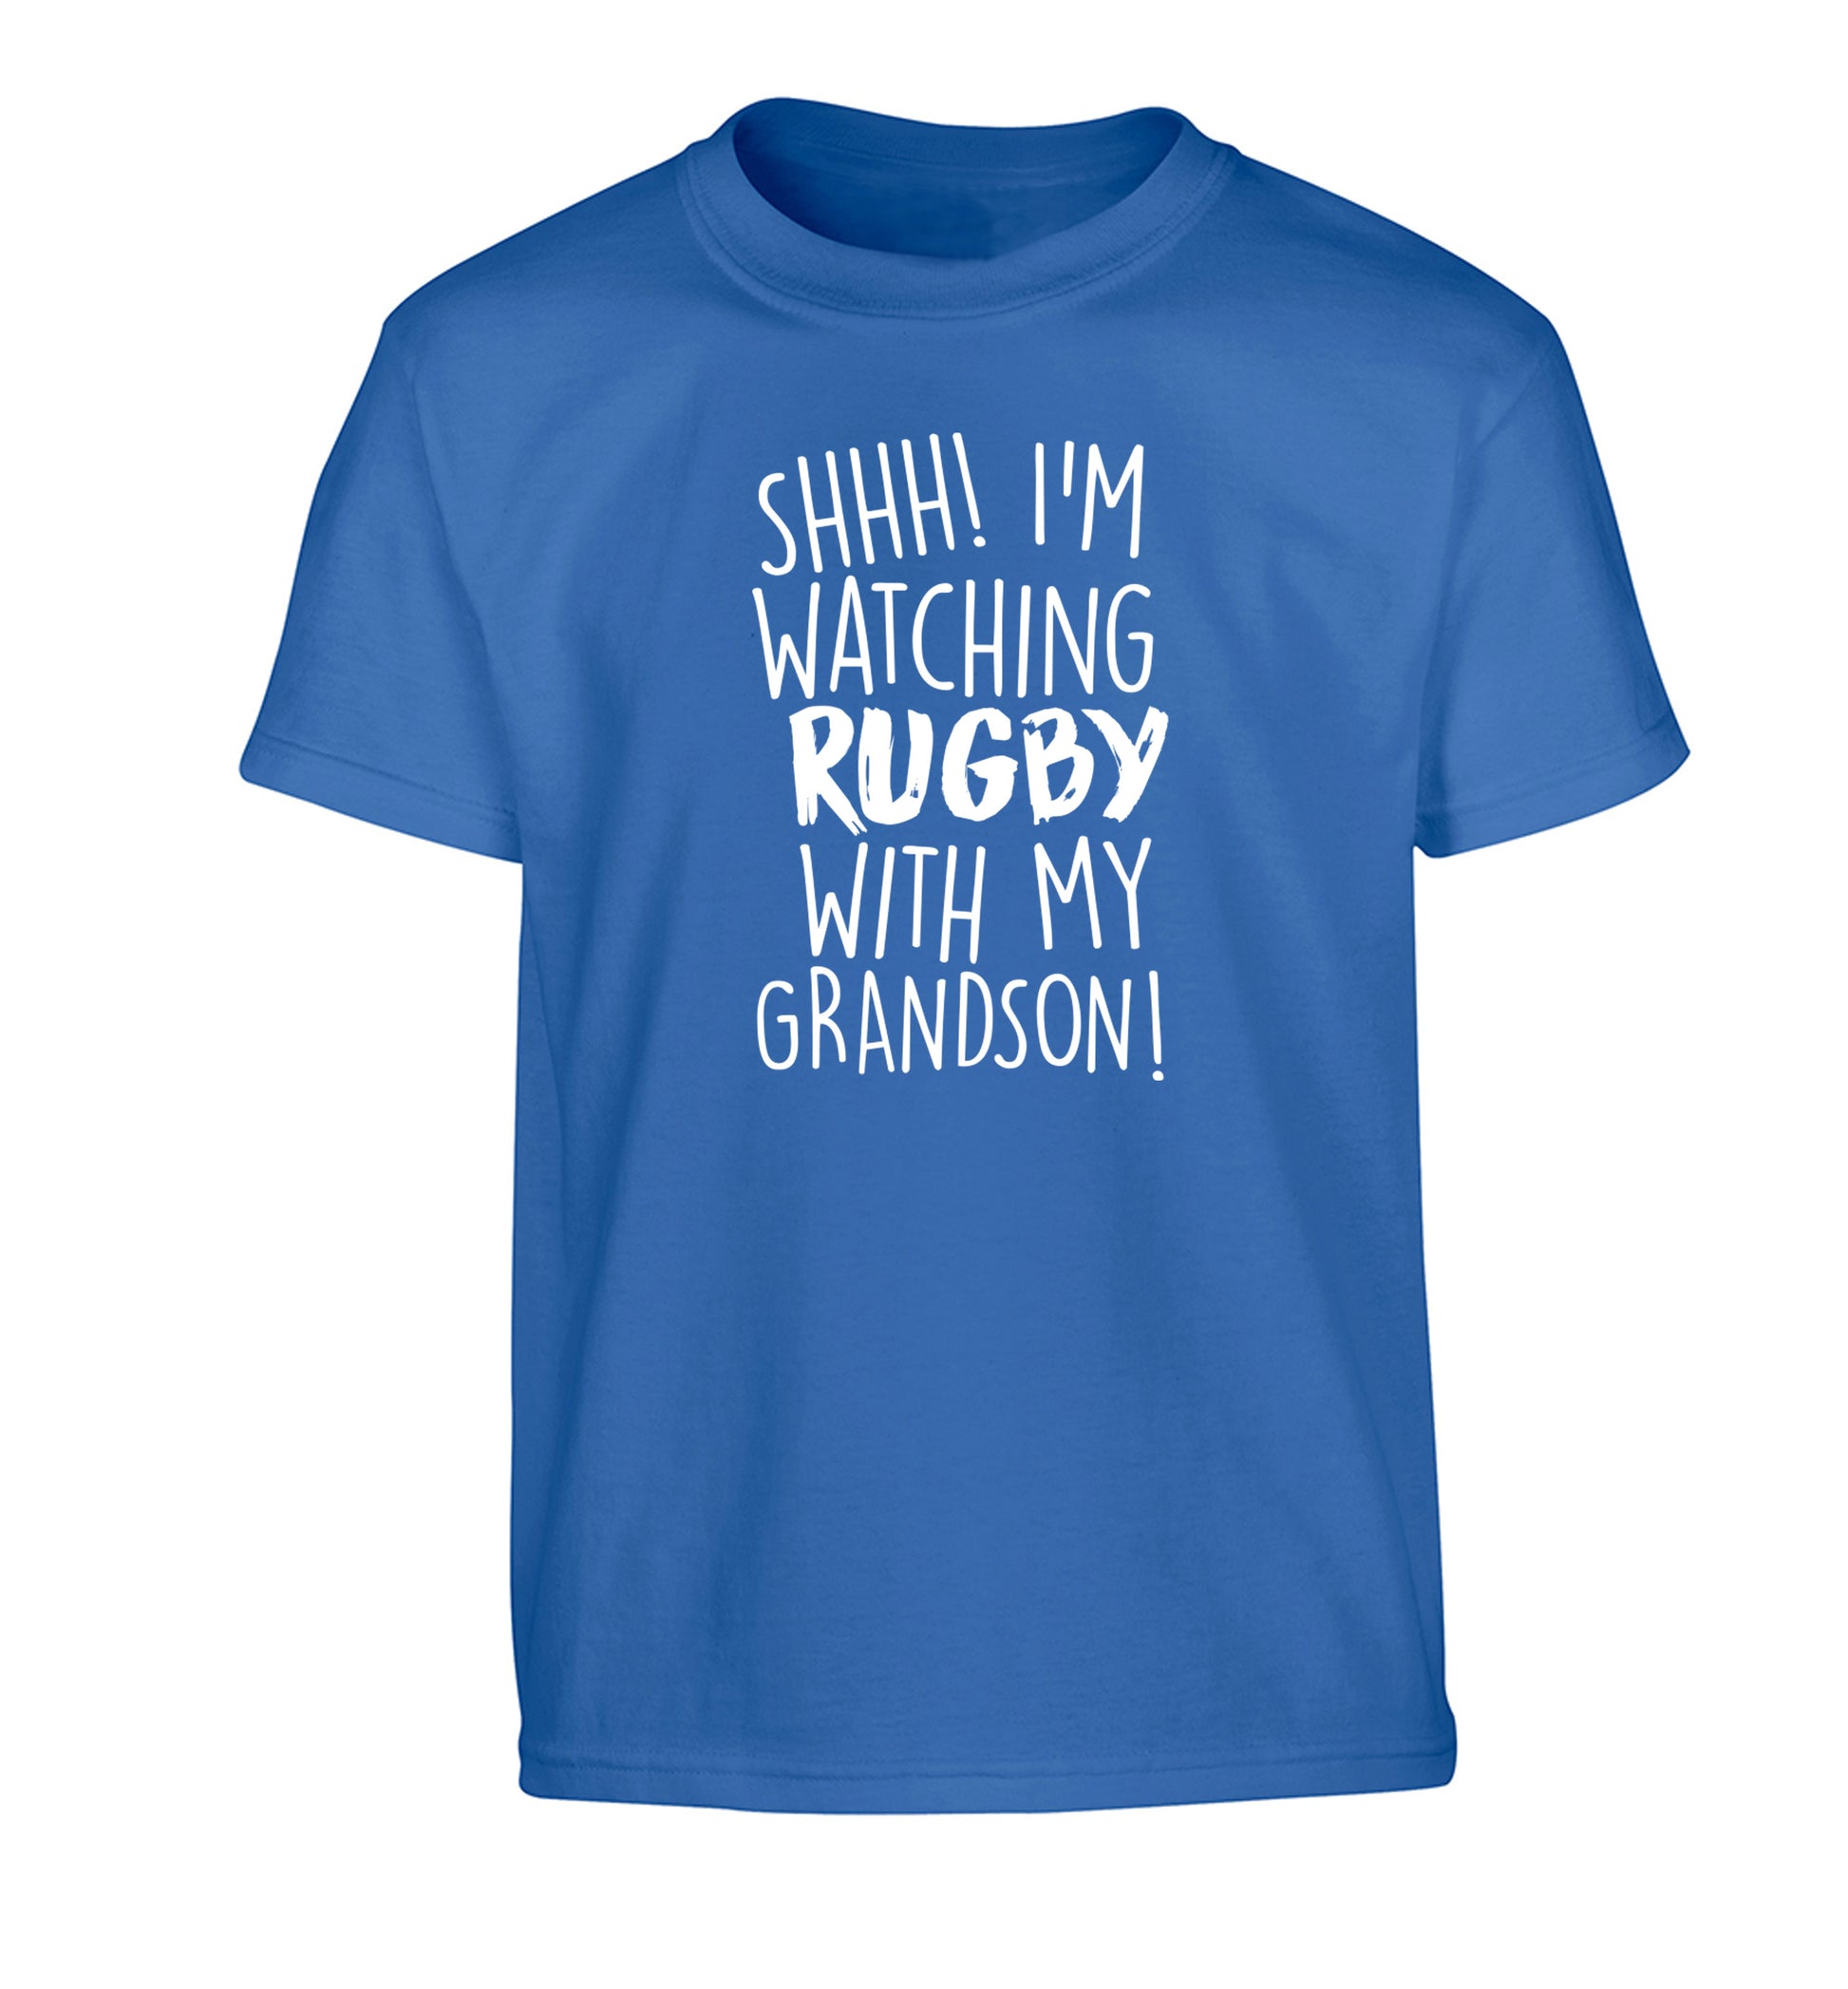 Shh I'm watching rugby with my grandson Children's blue Tshirt 12-13 Years